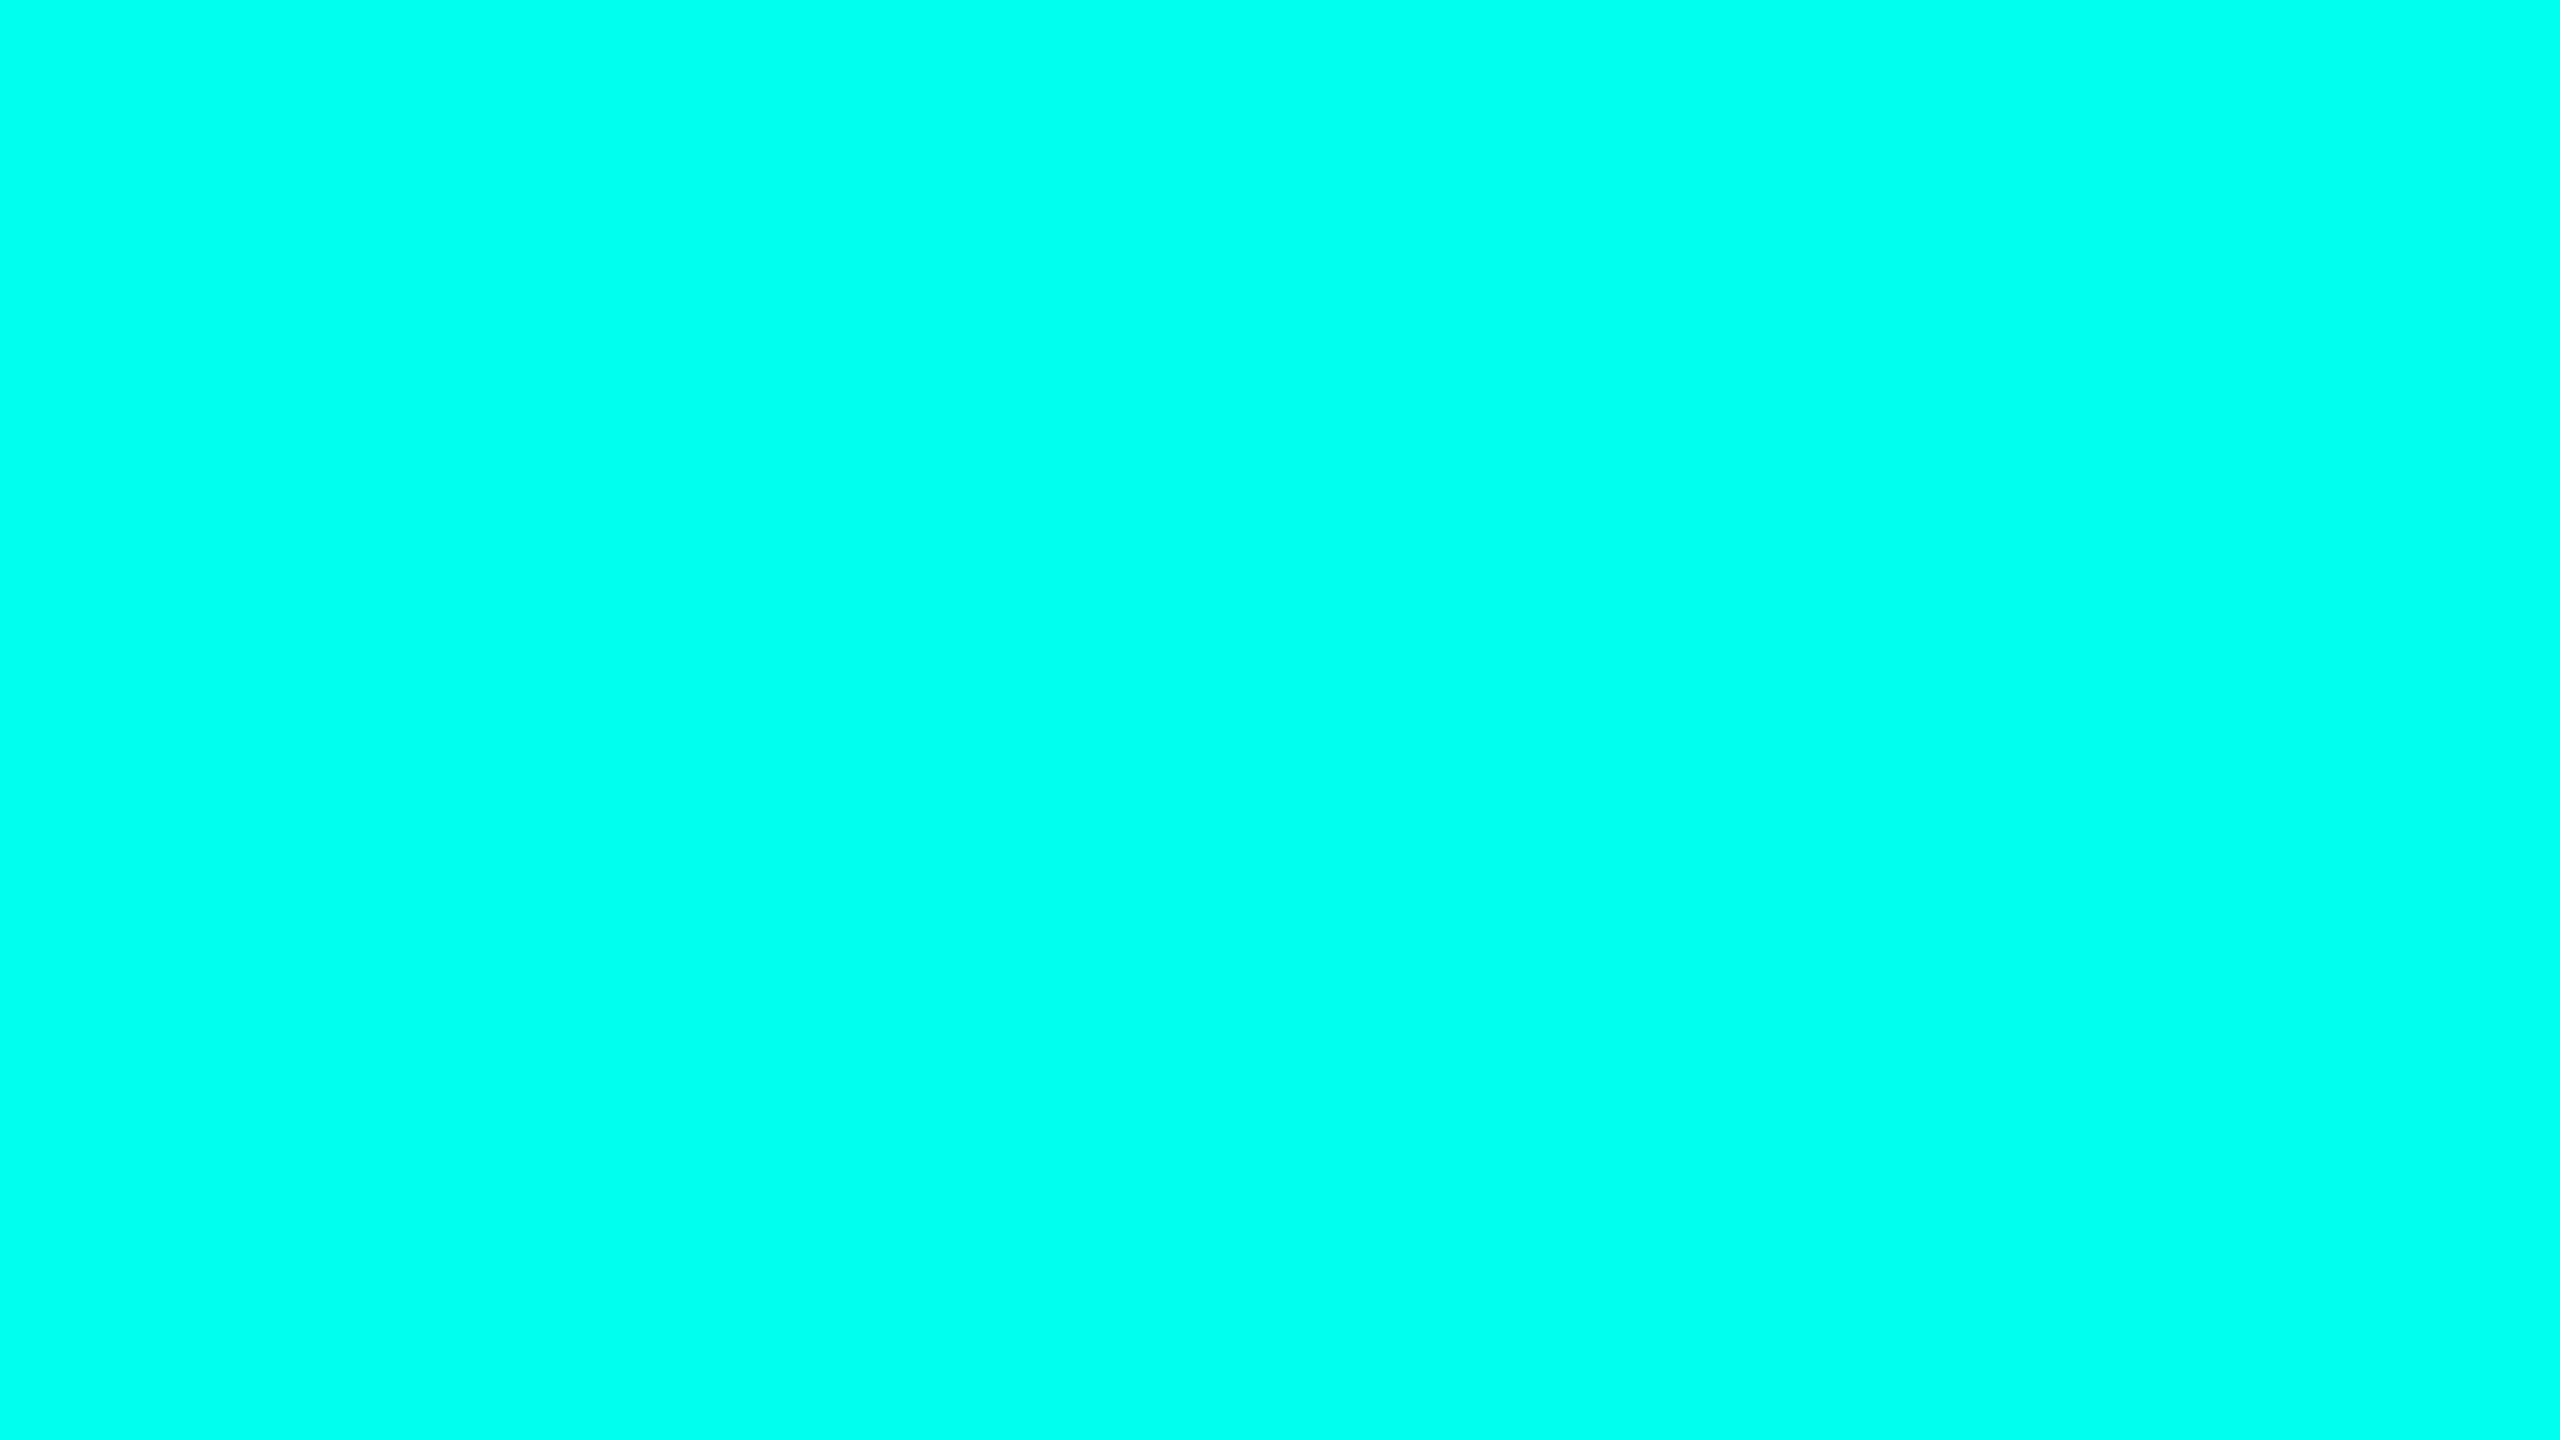 2560x1440 turquoise blue solid color background